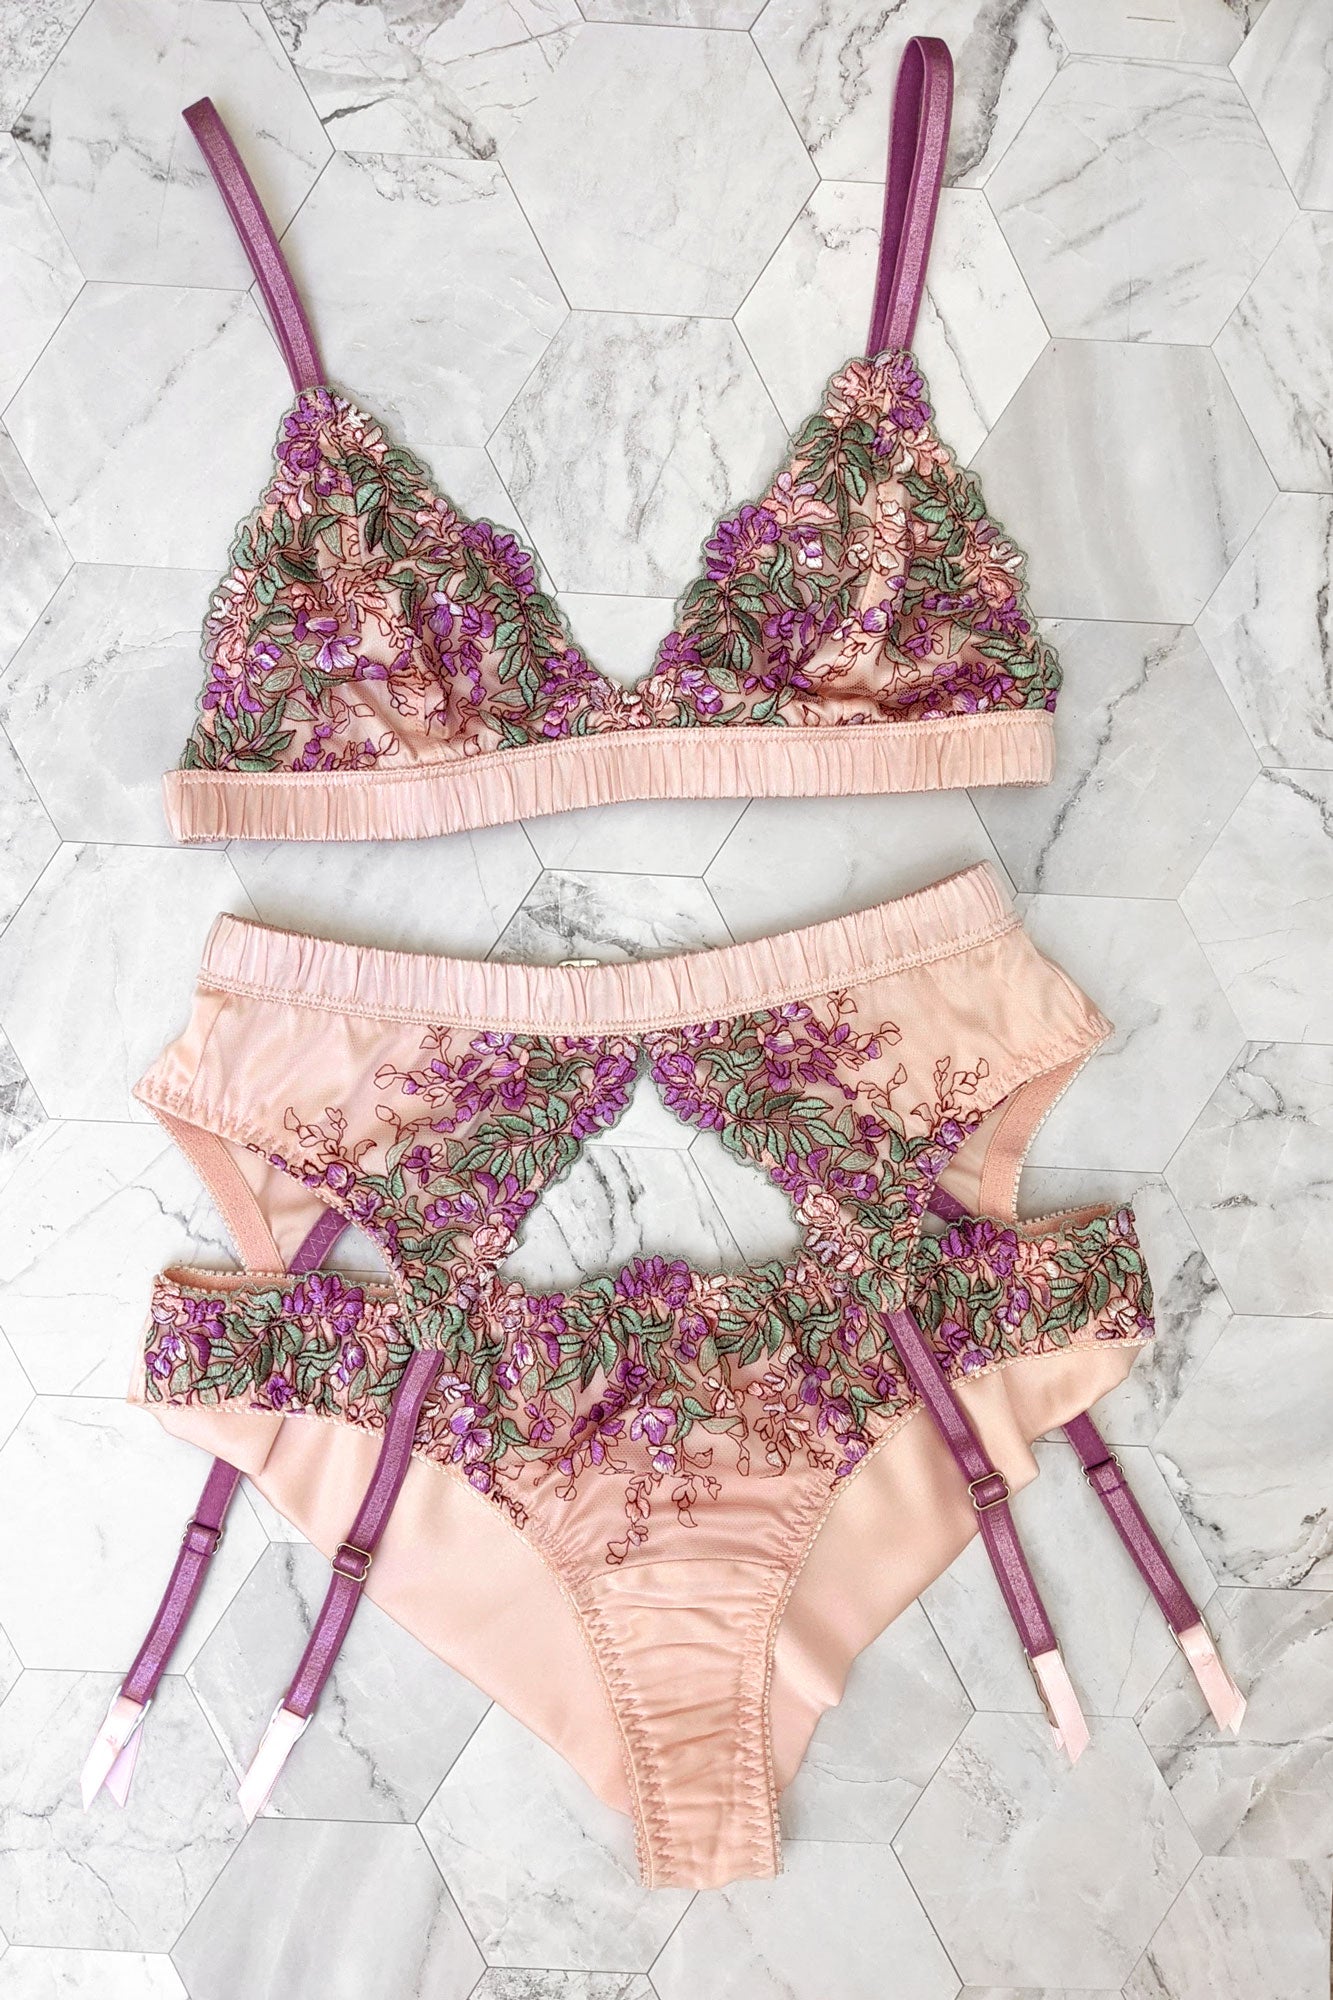 Wisteria 3 piece lingerie set with a floral embroidered garter belt